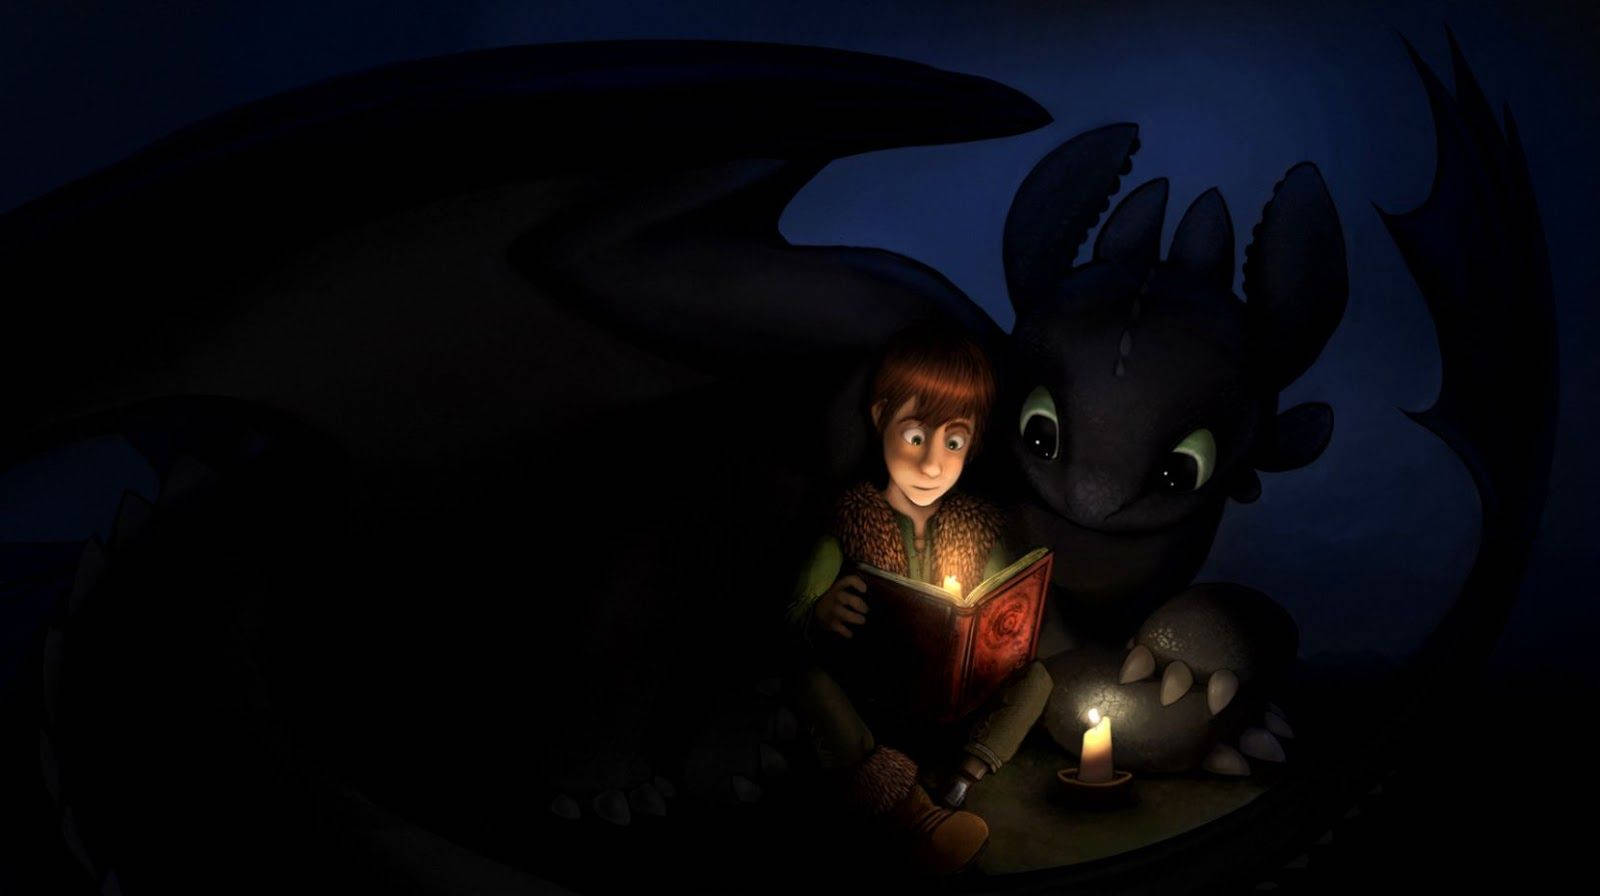 How Too Train Your Dragon Reading At Night Wallpaper